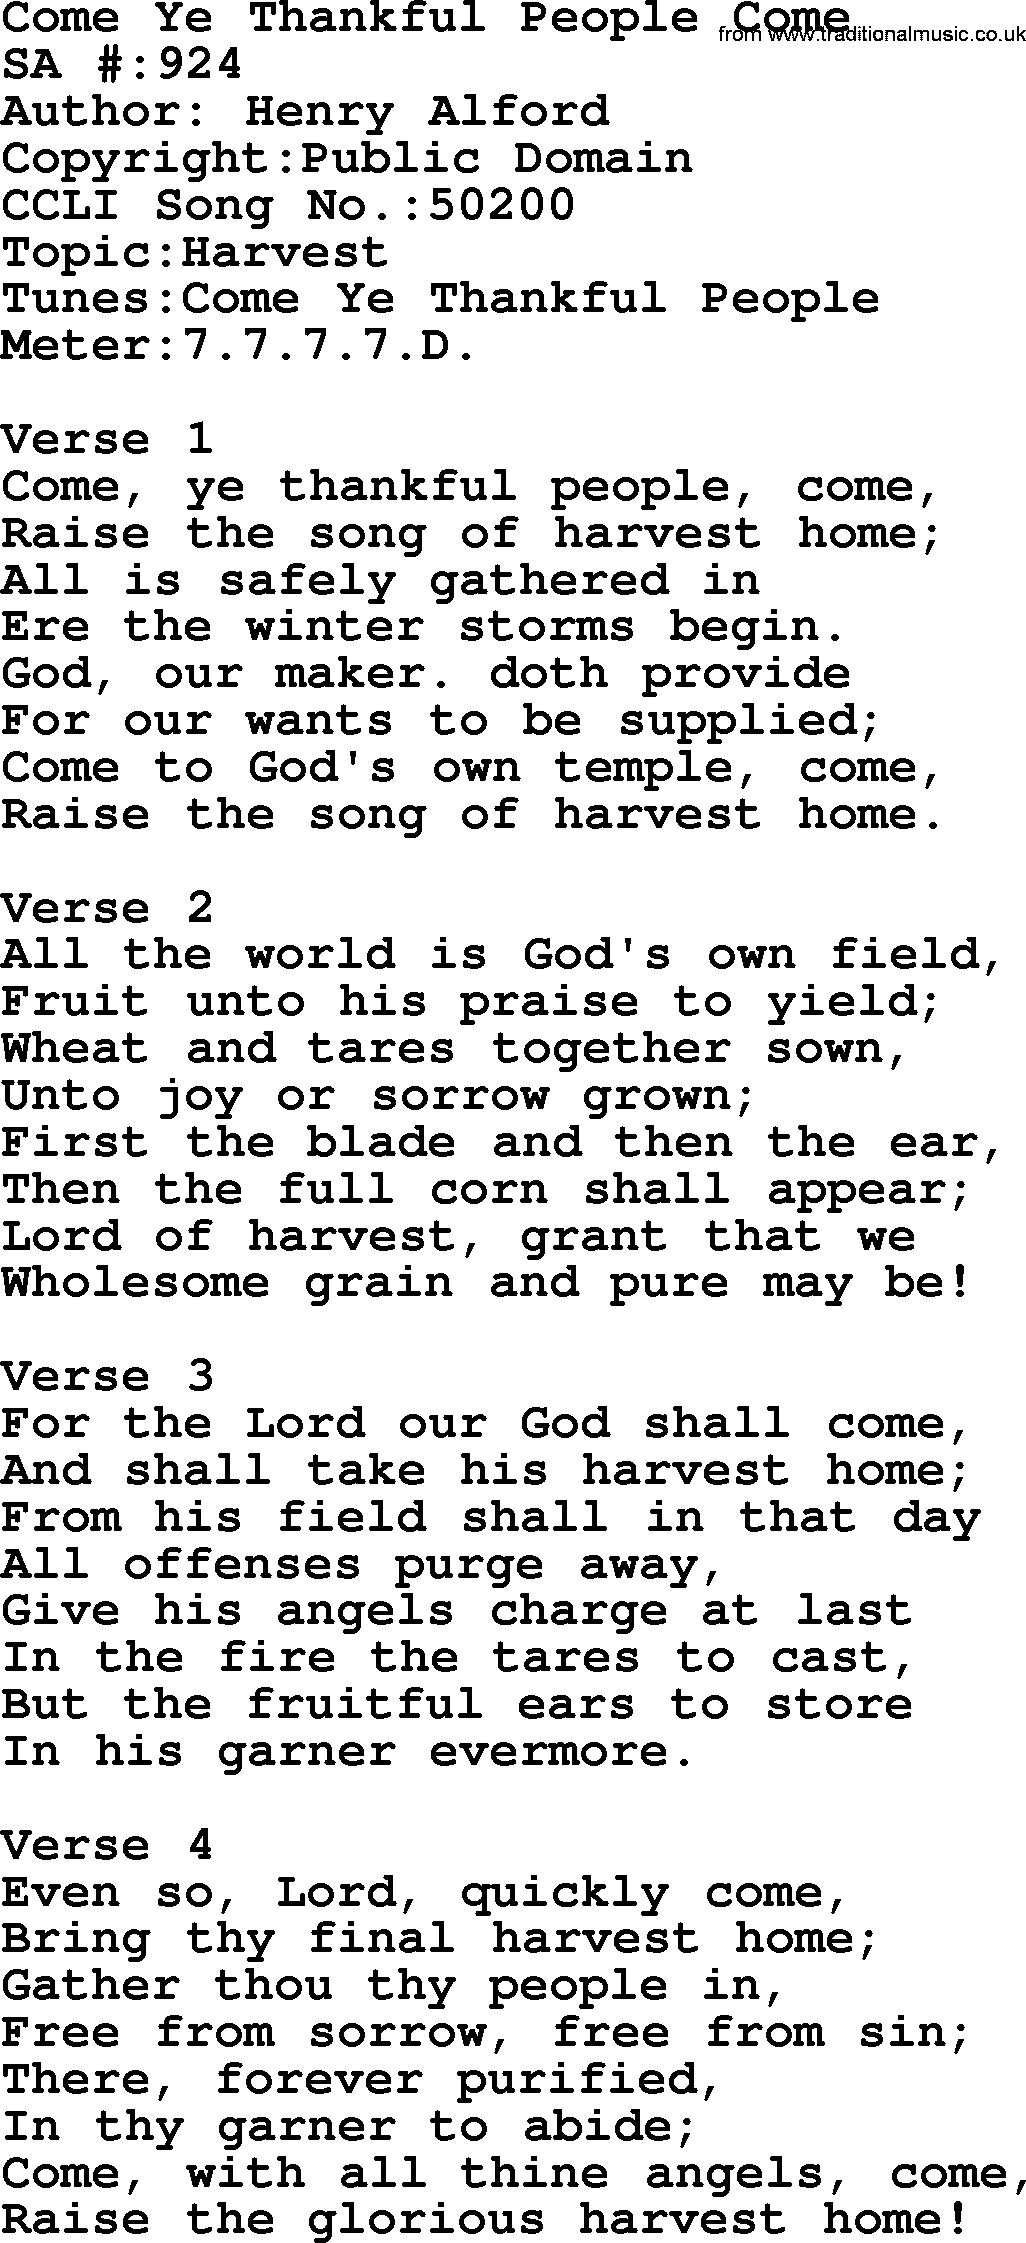 Salvation Army Hymnal, title: Come Ye Thankful People Come, with lyrics and PDF,